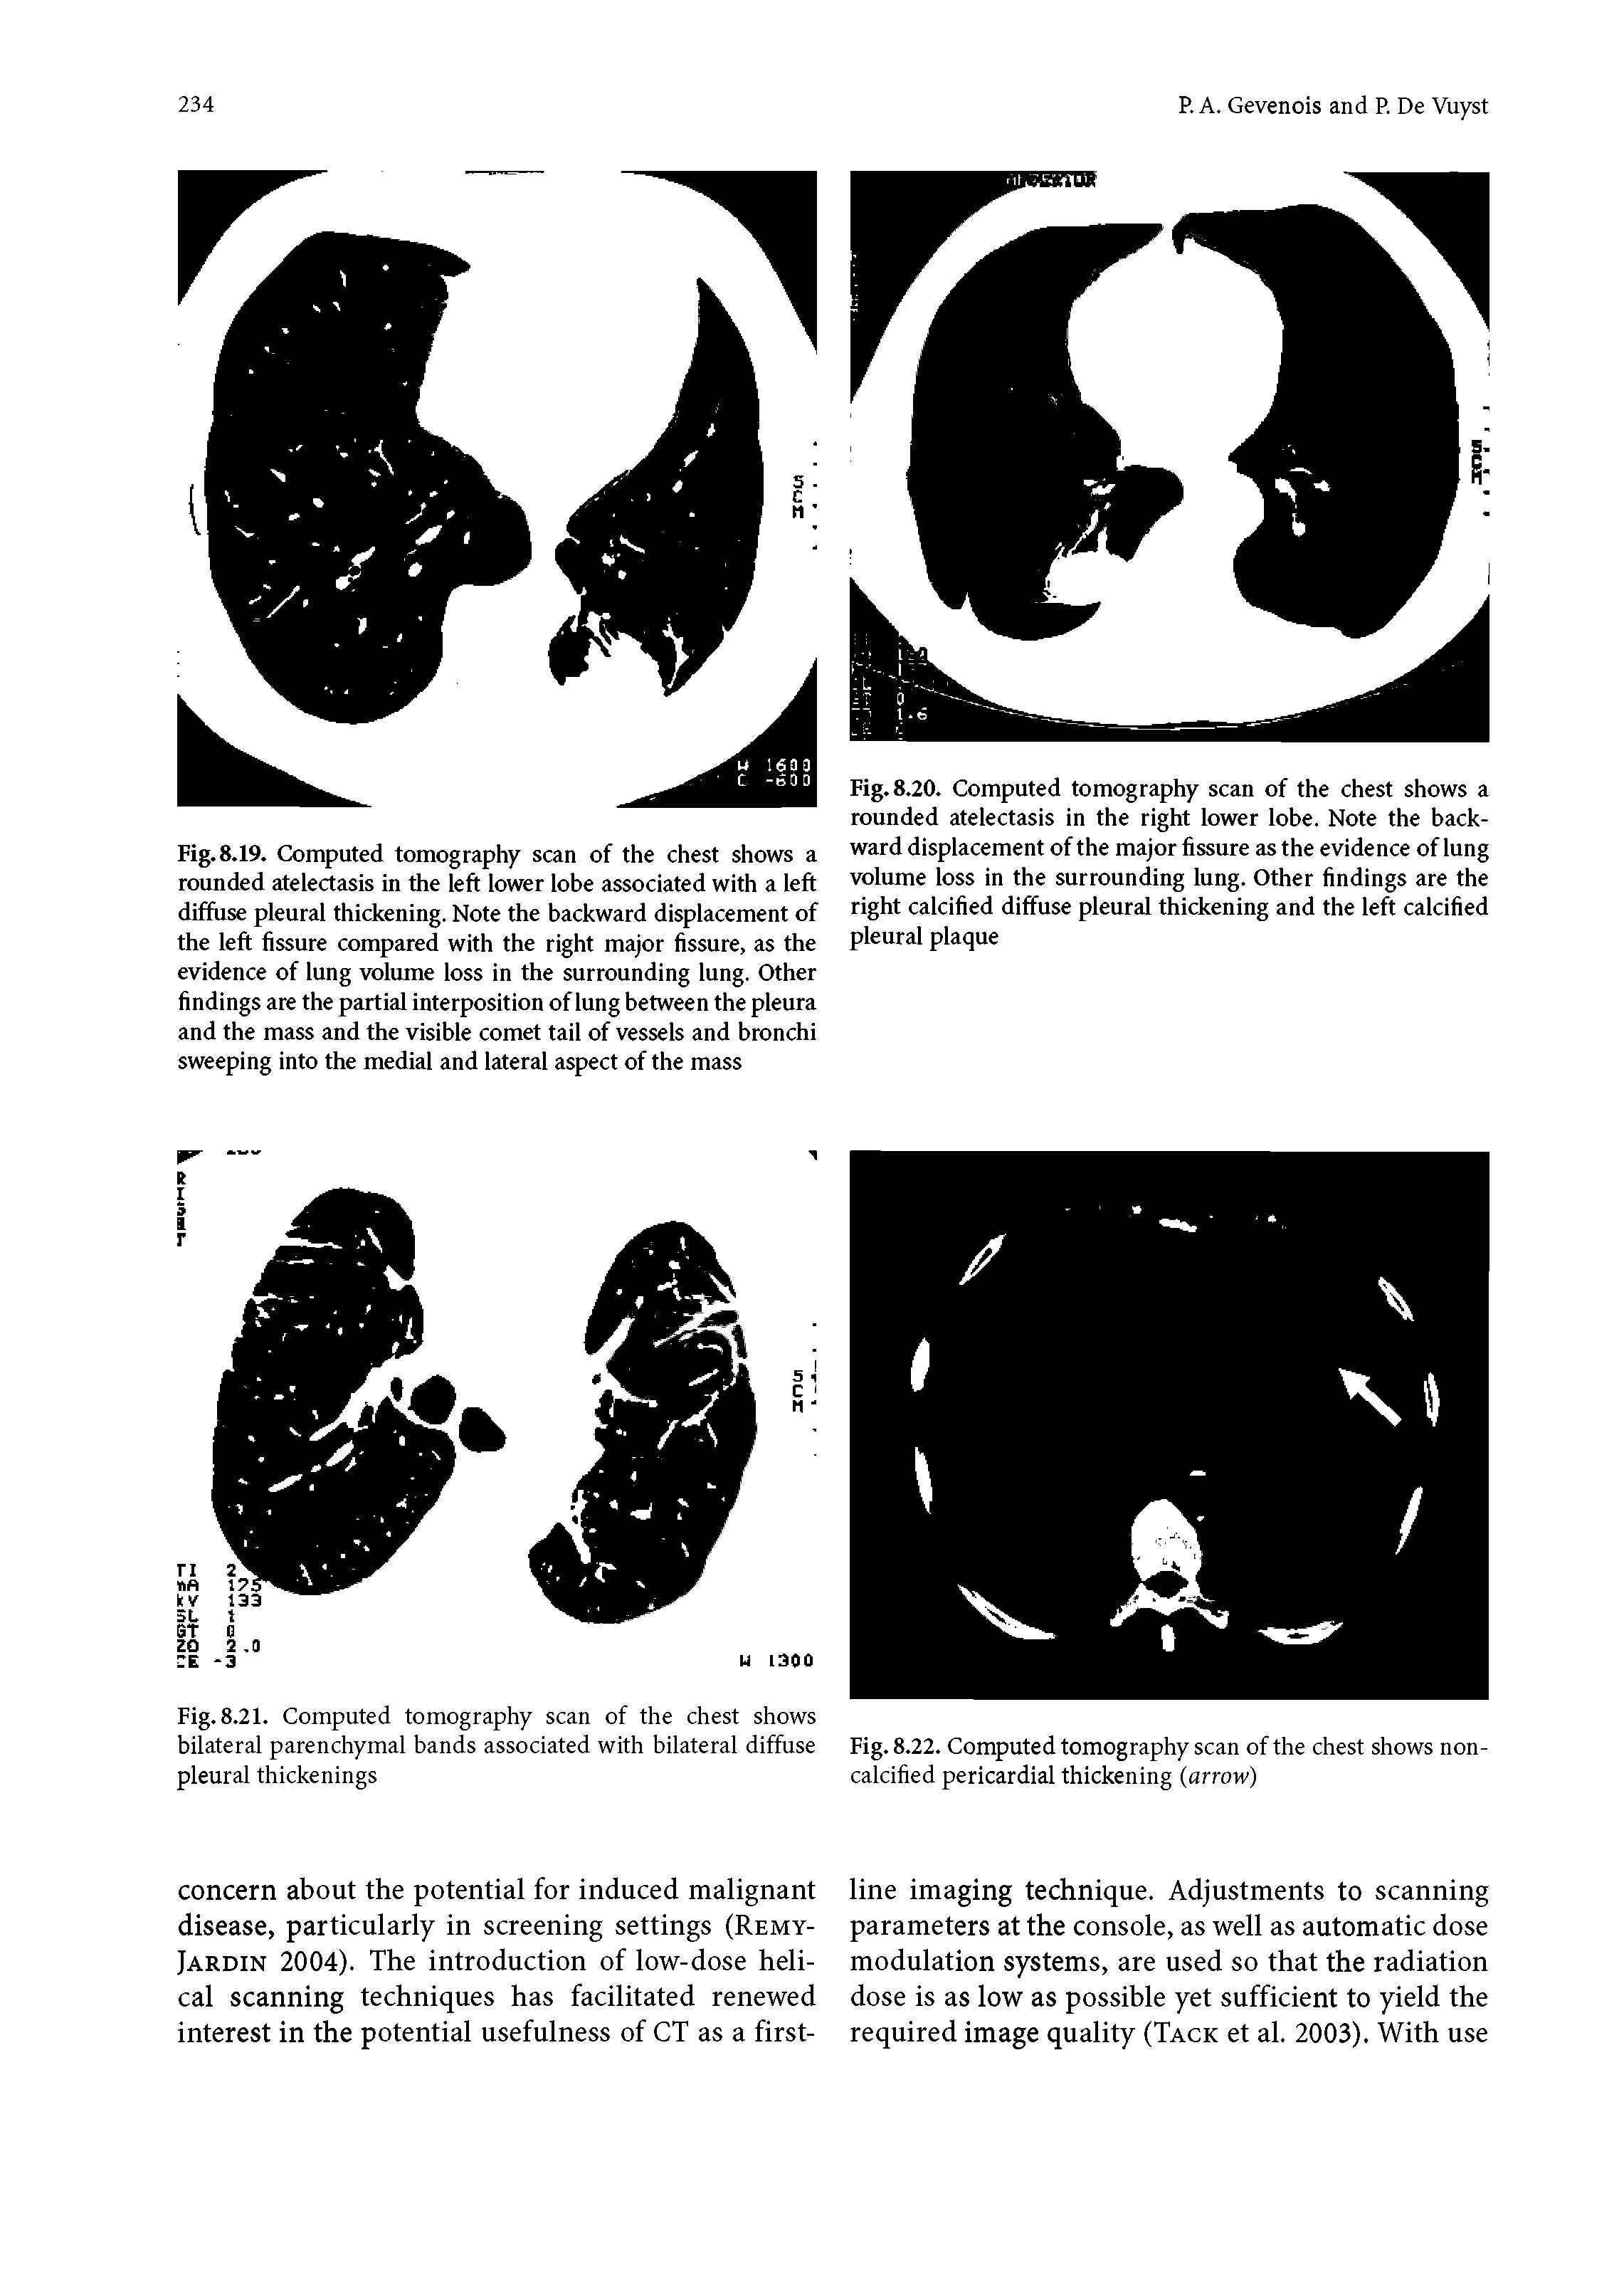 Fig. 8.19. Computed tomography scan of the chest shows a rounded atelectasis in the left lower lobe associated with a left diffuse pleural thickening. Note the backward displacement of the left fissure compared with the right major fissure, as the evidence of lung volume loss in the surrounding lung. Other findings are the partial interposition of lung between the pleura and the mass and the visible comet tail of vessels and bronchi sweeping into the medial and lateral aspect of the mass...